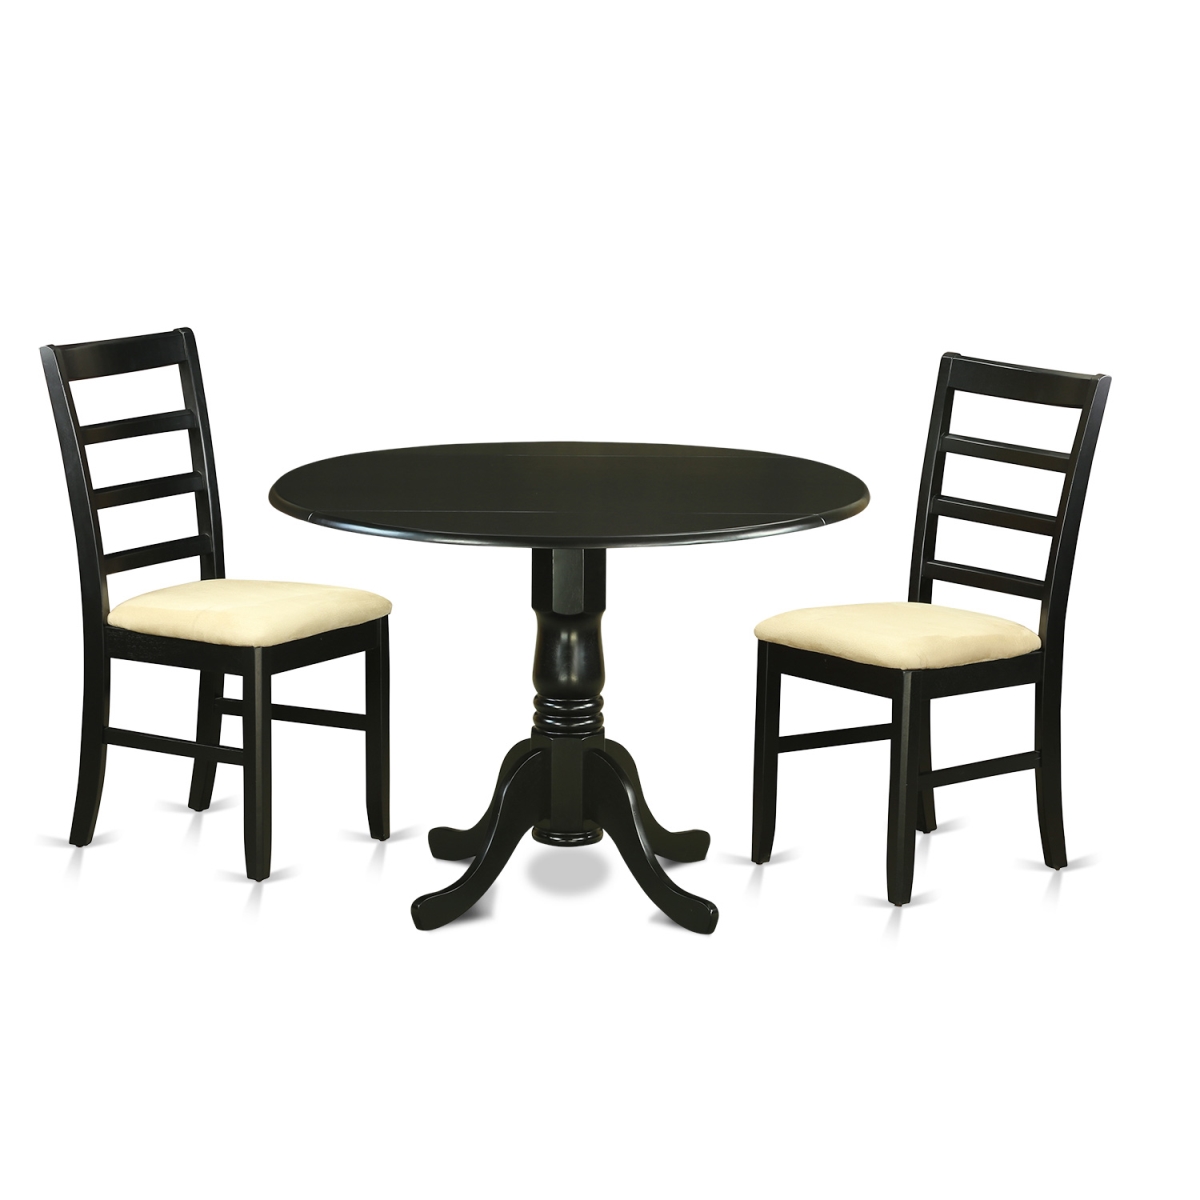 Picture of East West Furniture DLPF3-BLK-C Dining Table Set - Dining Room Table & 2 Chairs, Black - 3 Piece